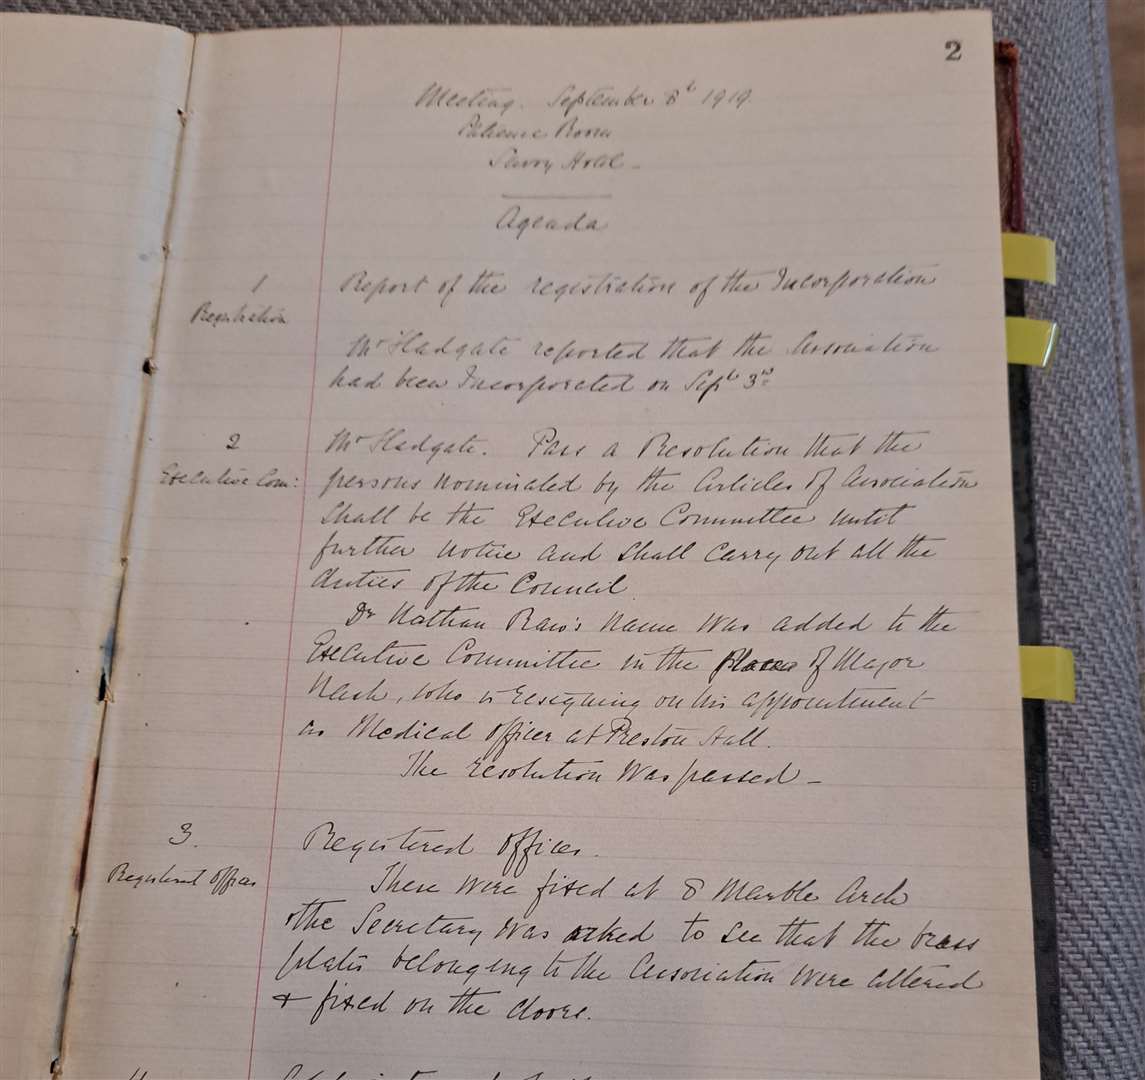 The minutes of the very first meeting on September 8, 1919